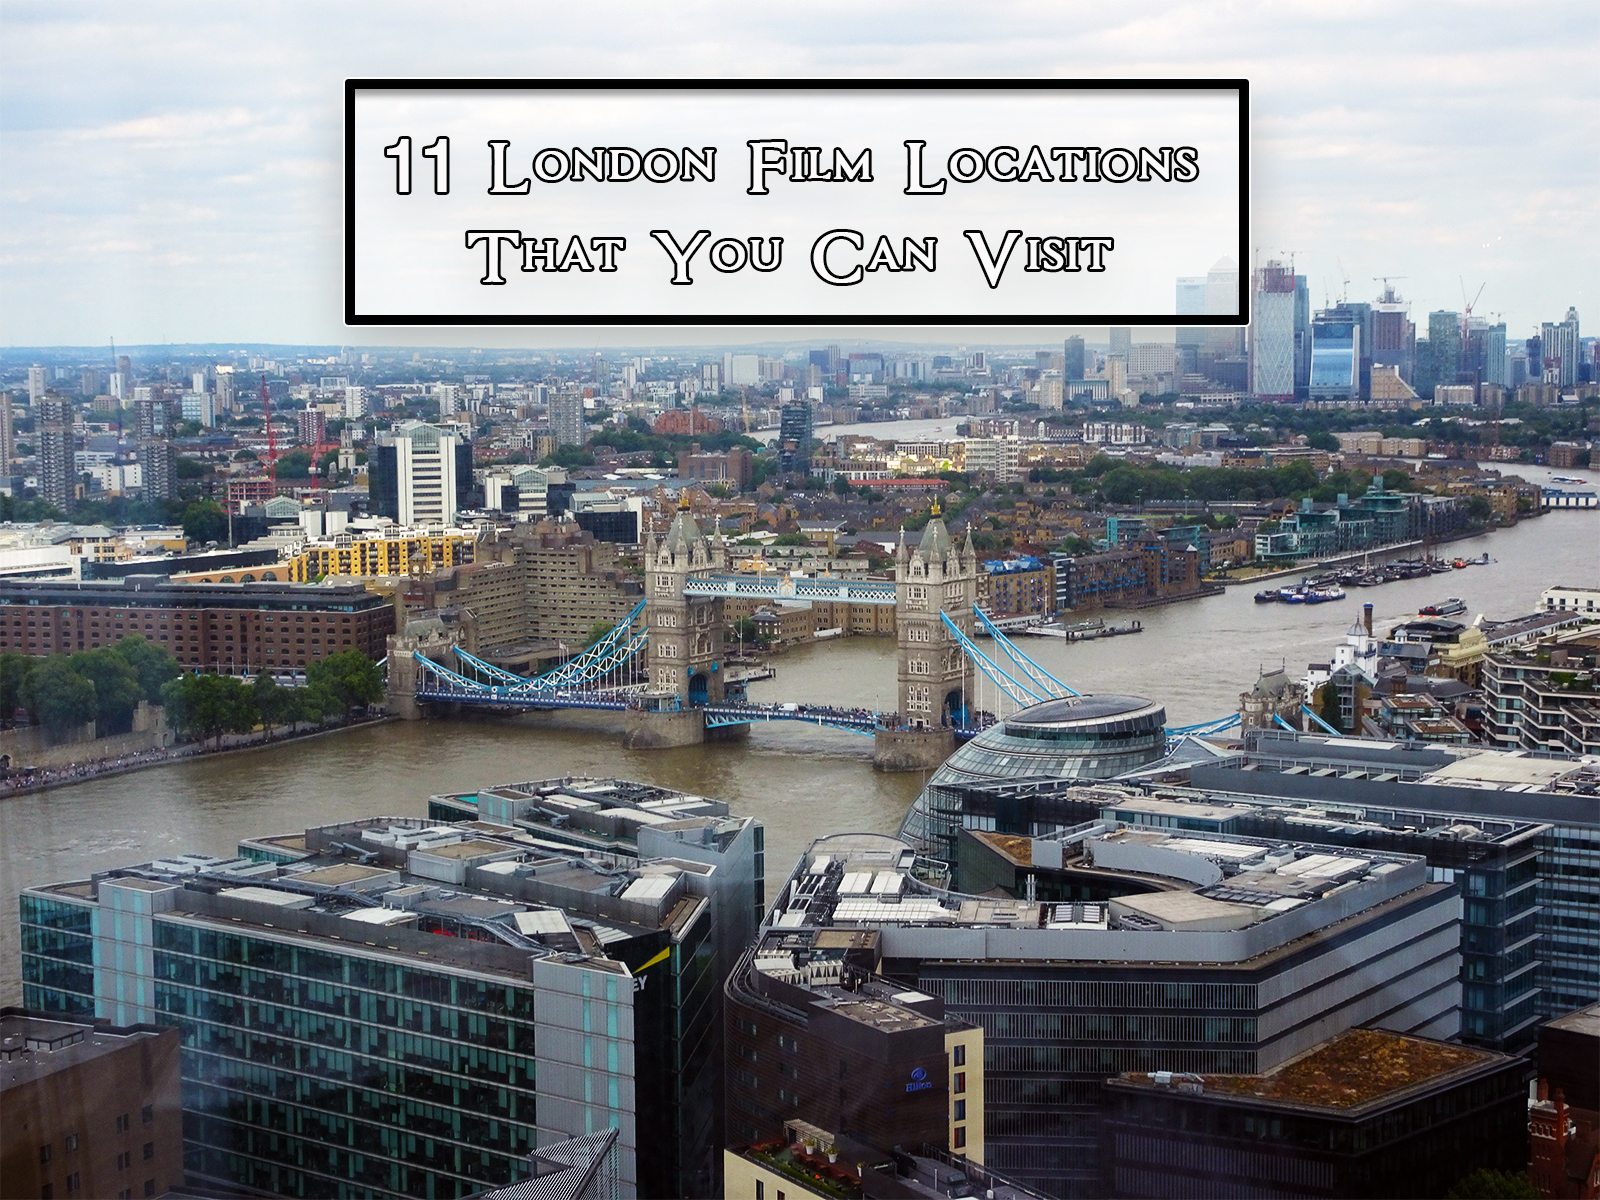 11 London Film Locations That You Can Visit